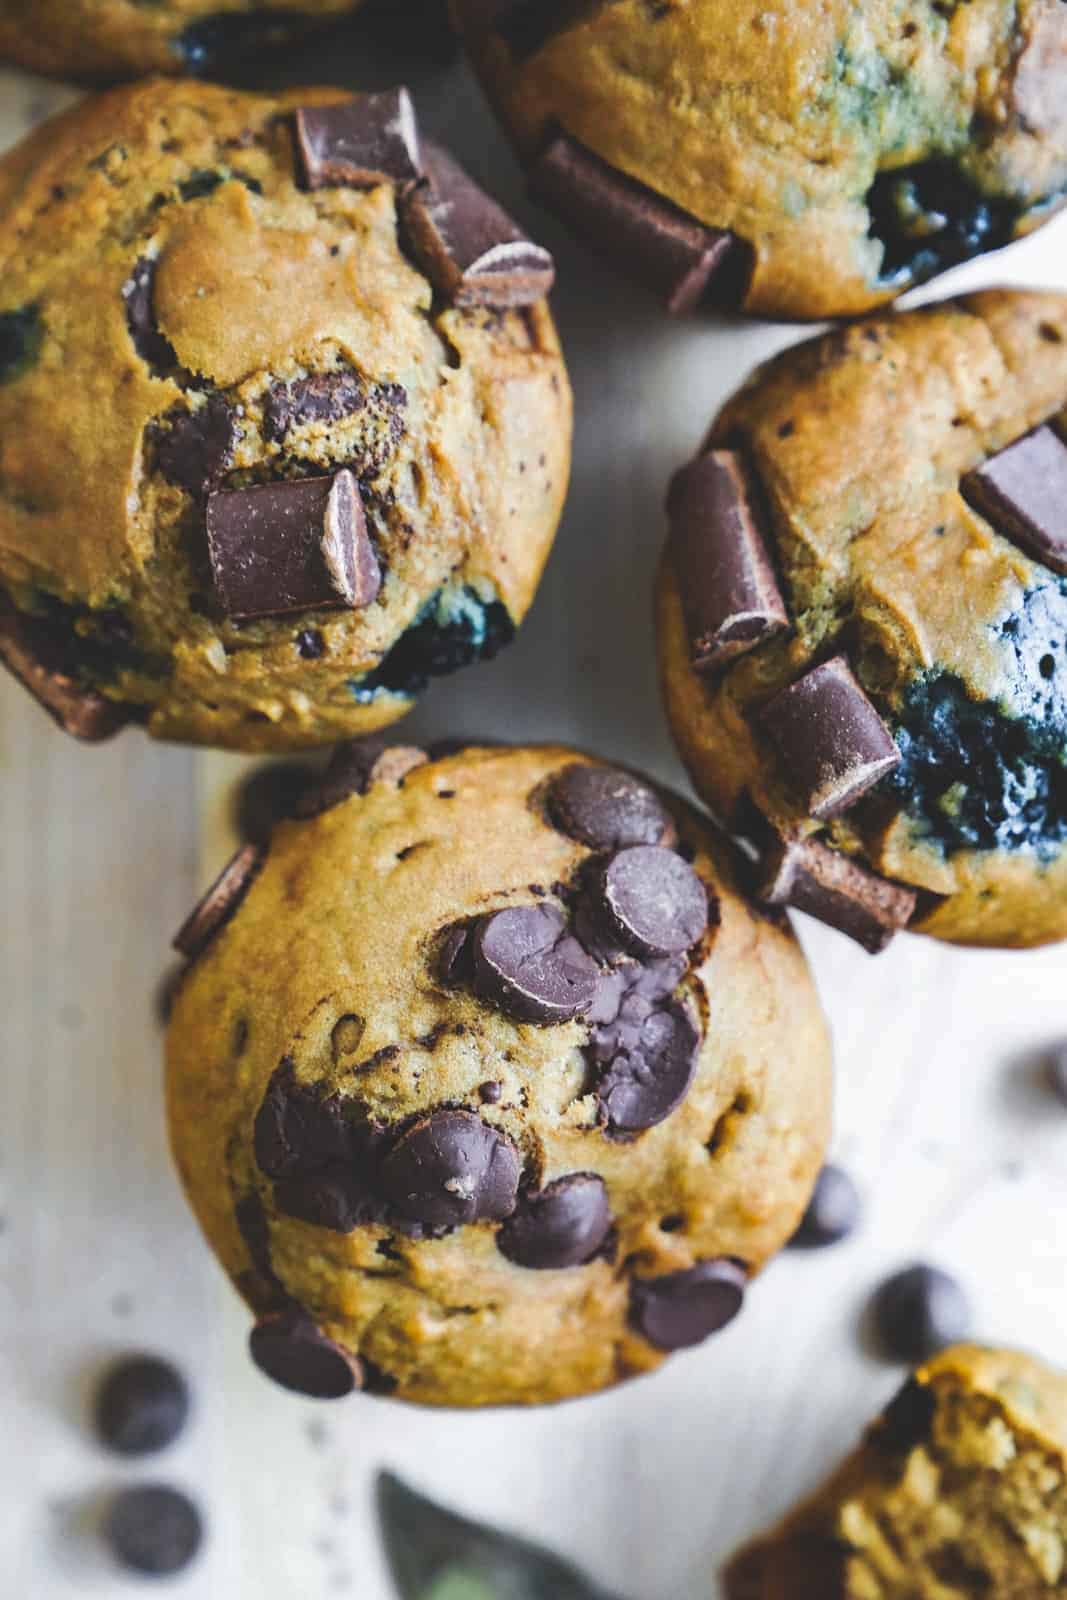 These vegan blueberry chocolate chip muffins will knock your socks off, and are such a good tasty treat for while you're on-the-go, or even as a snack or breakfast!